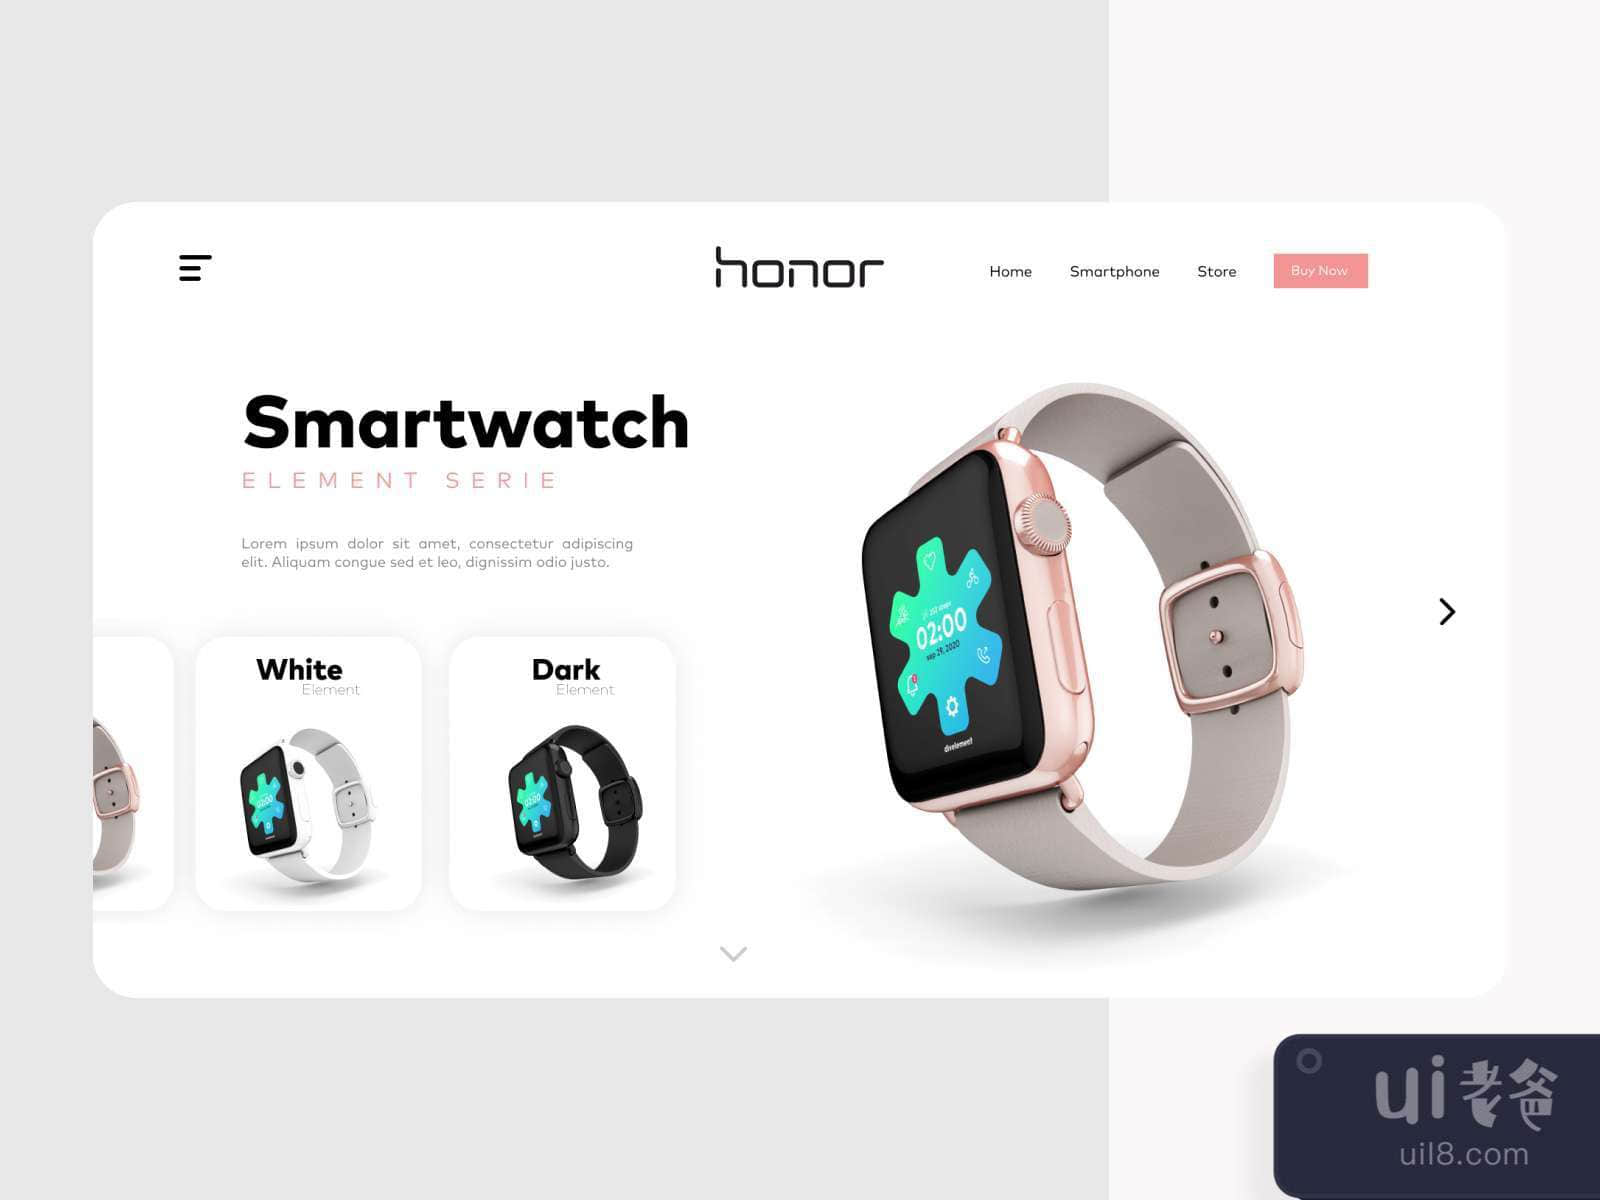 Smartwatch Concept Web for Figma and Adobe XD No 3